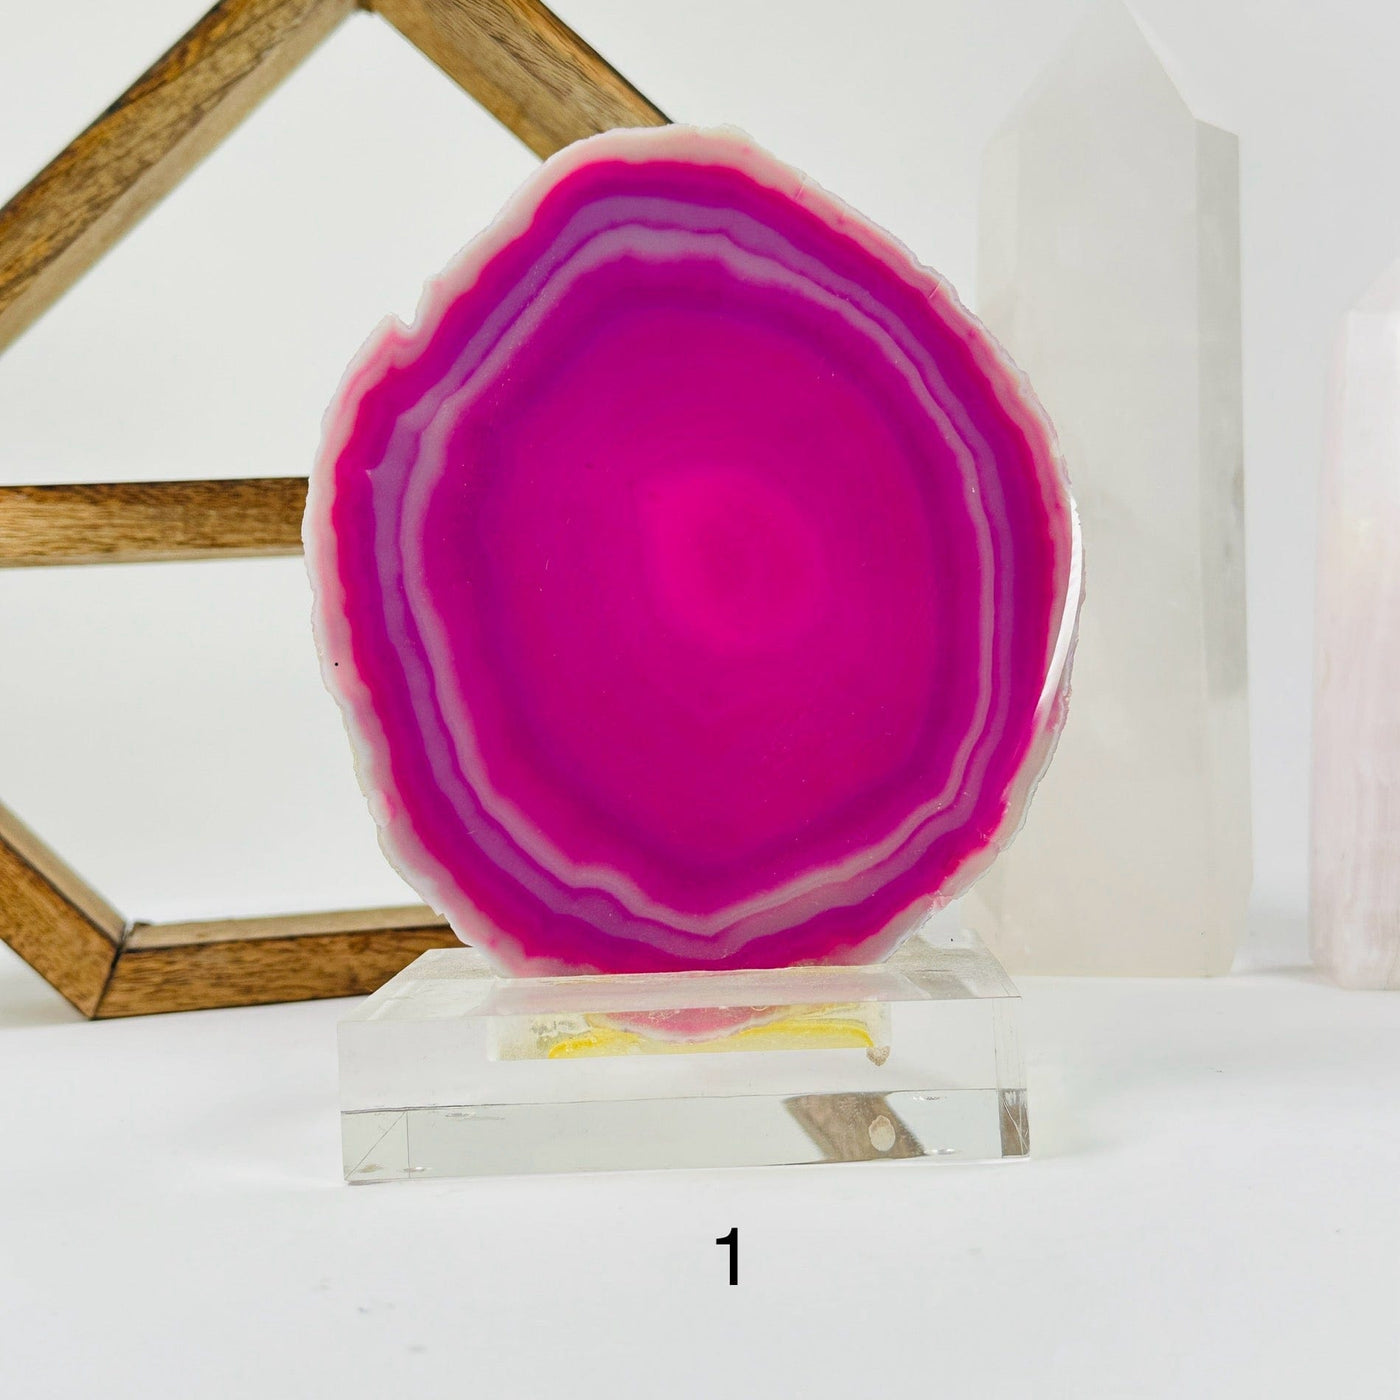 pink agate slice on acrylic stand with decorations in the background